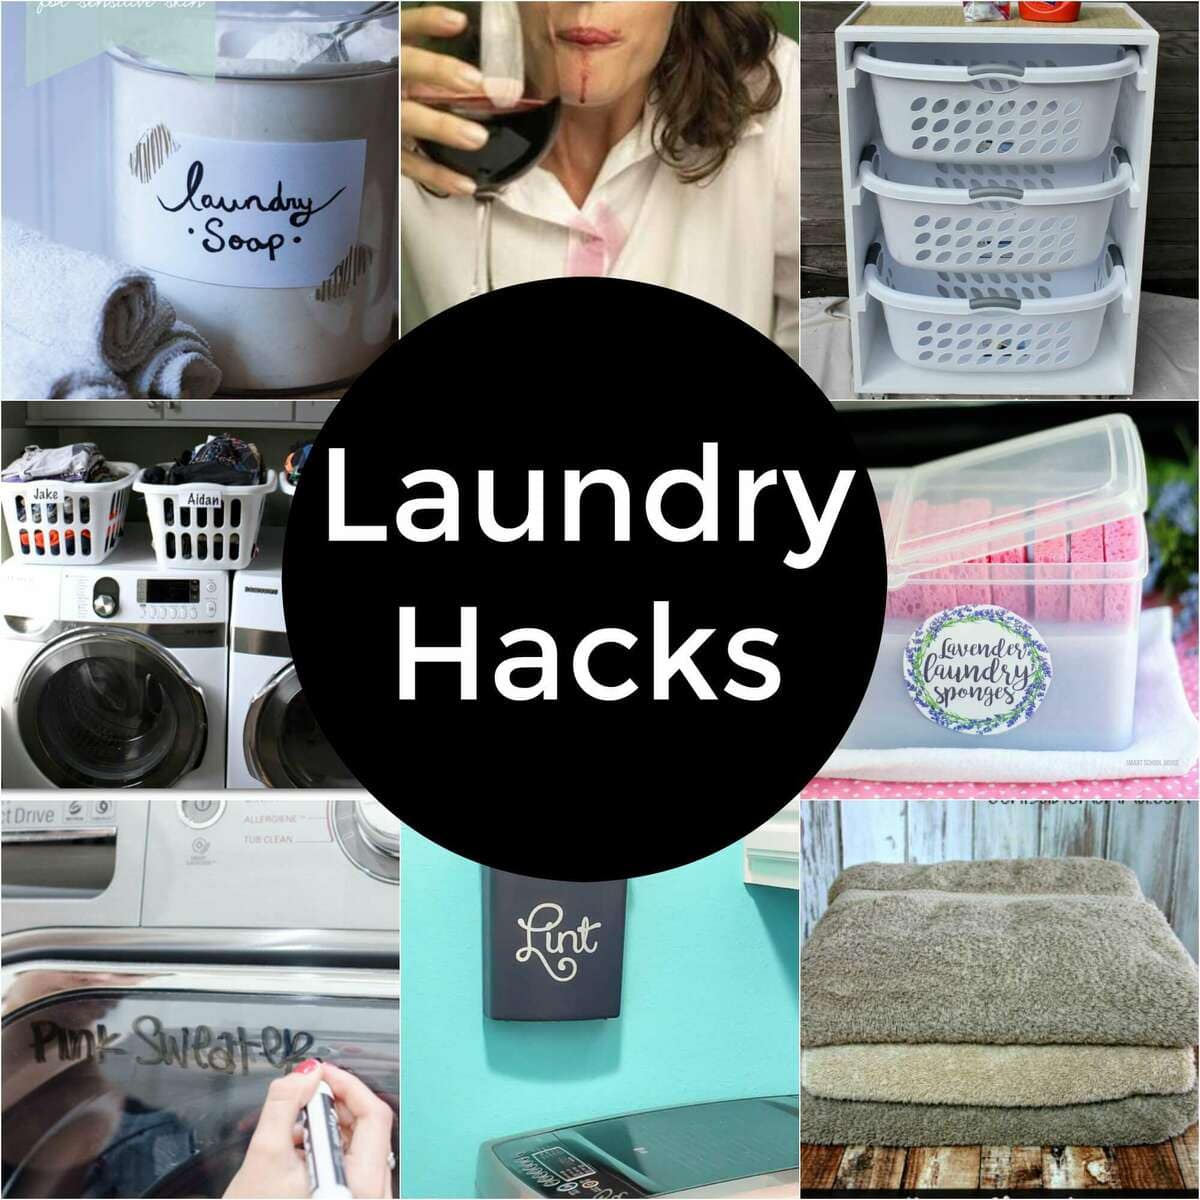 Collage image of laundry hacks and ideas